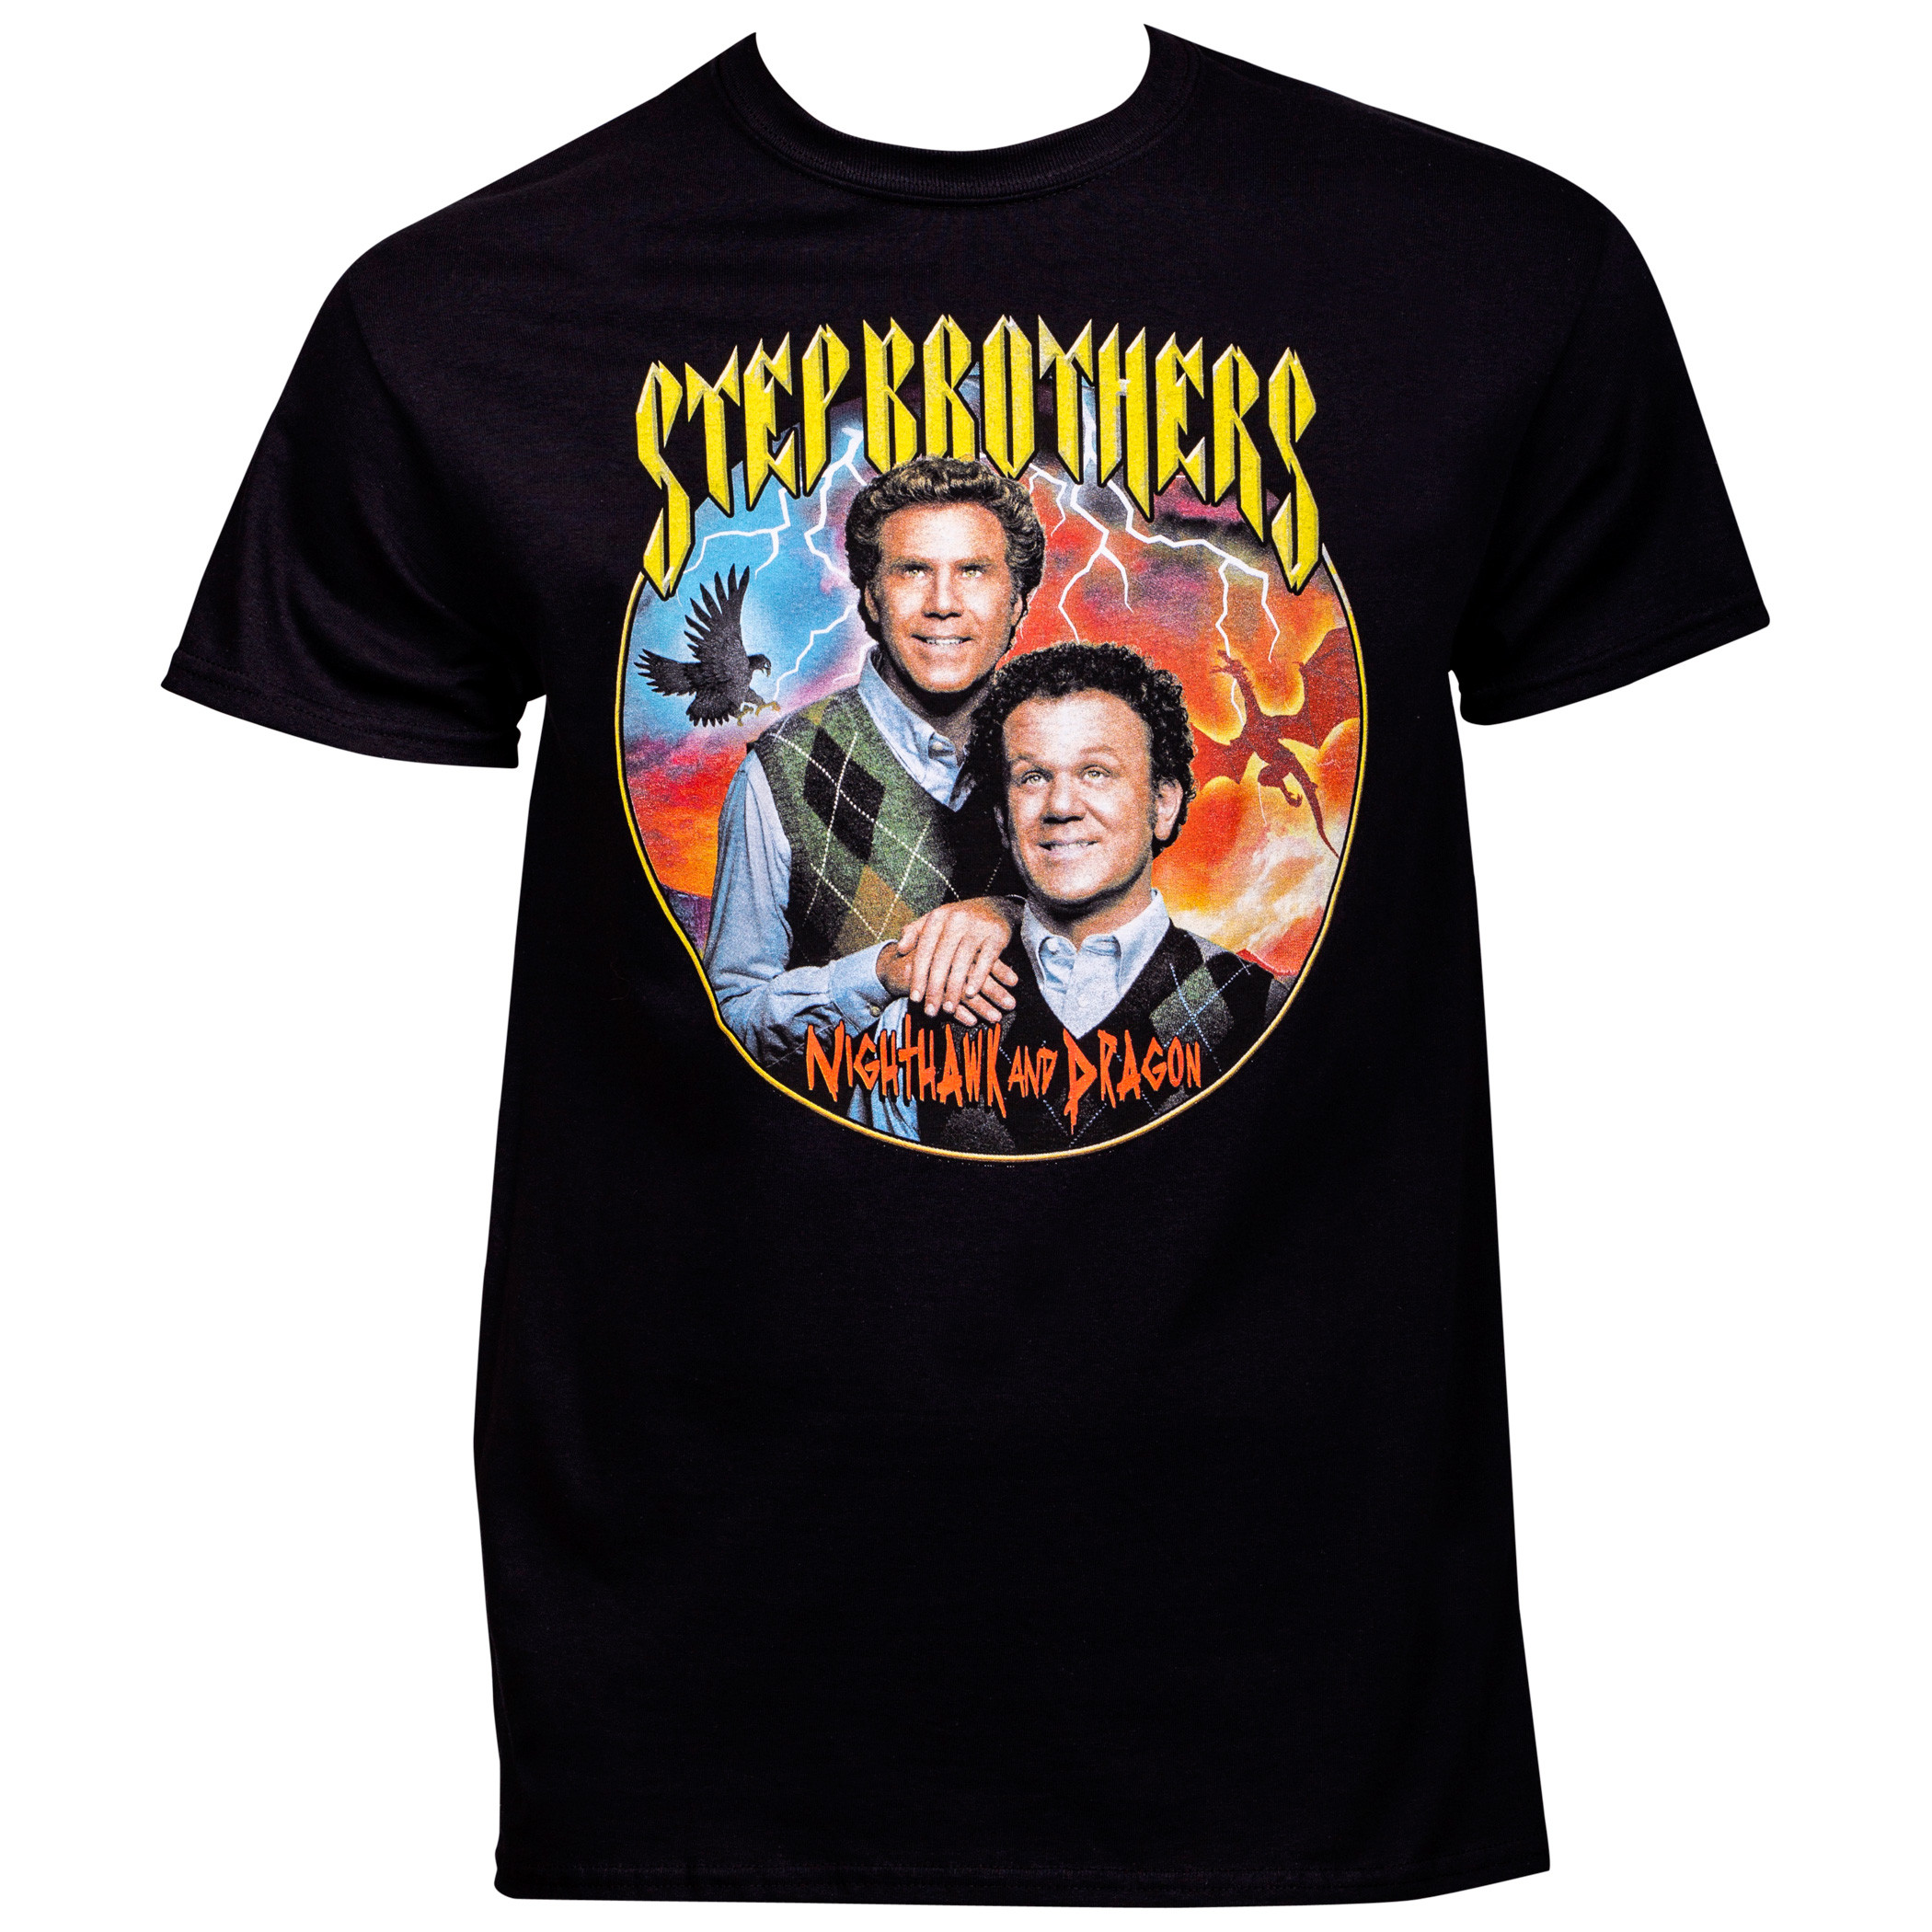 Step Brothers Nighthawk and Dragon T-Shirt